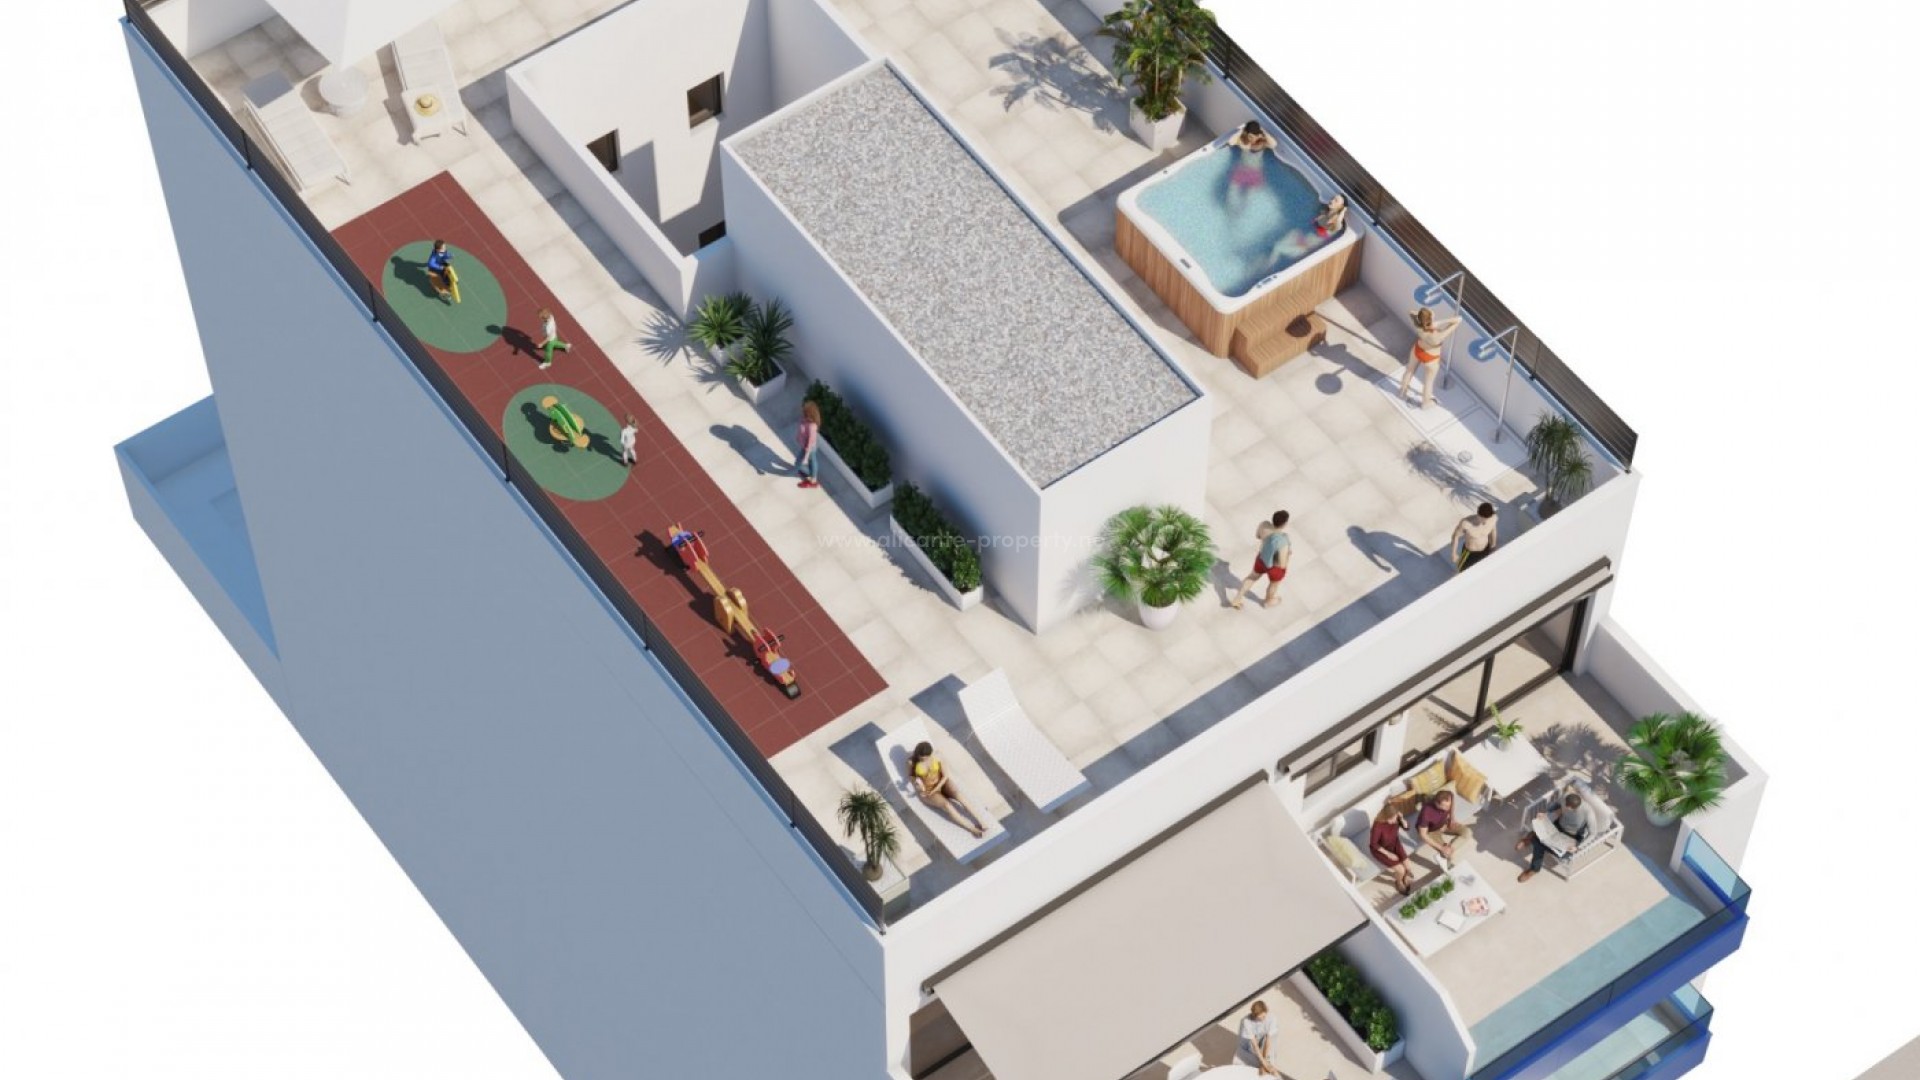 New apartments in Guardamar del Segura, 550 from the beach, 3 bedrooms, 2 bathrooms, private garden w/pool, spa, gym and a shared solarium with hot tub